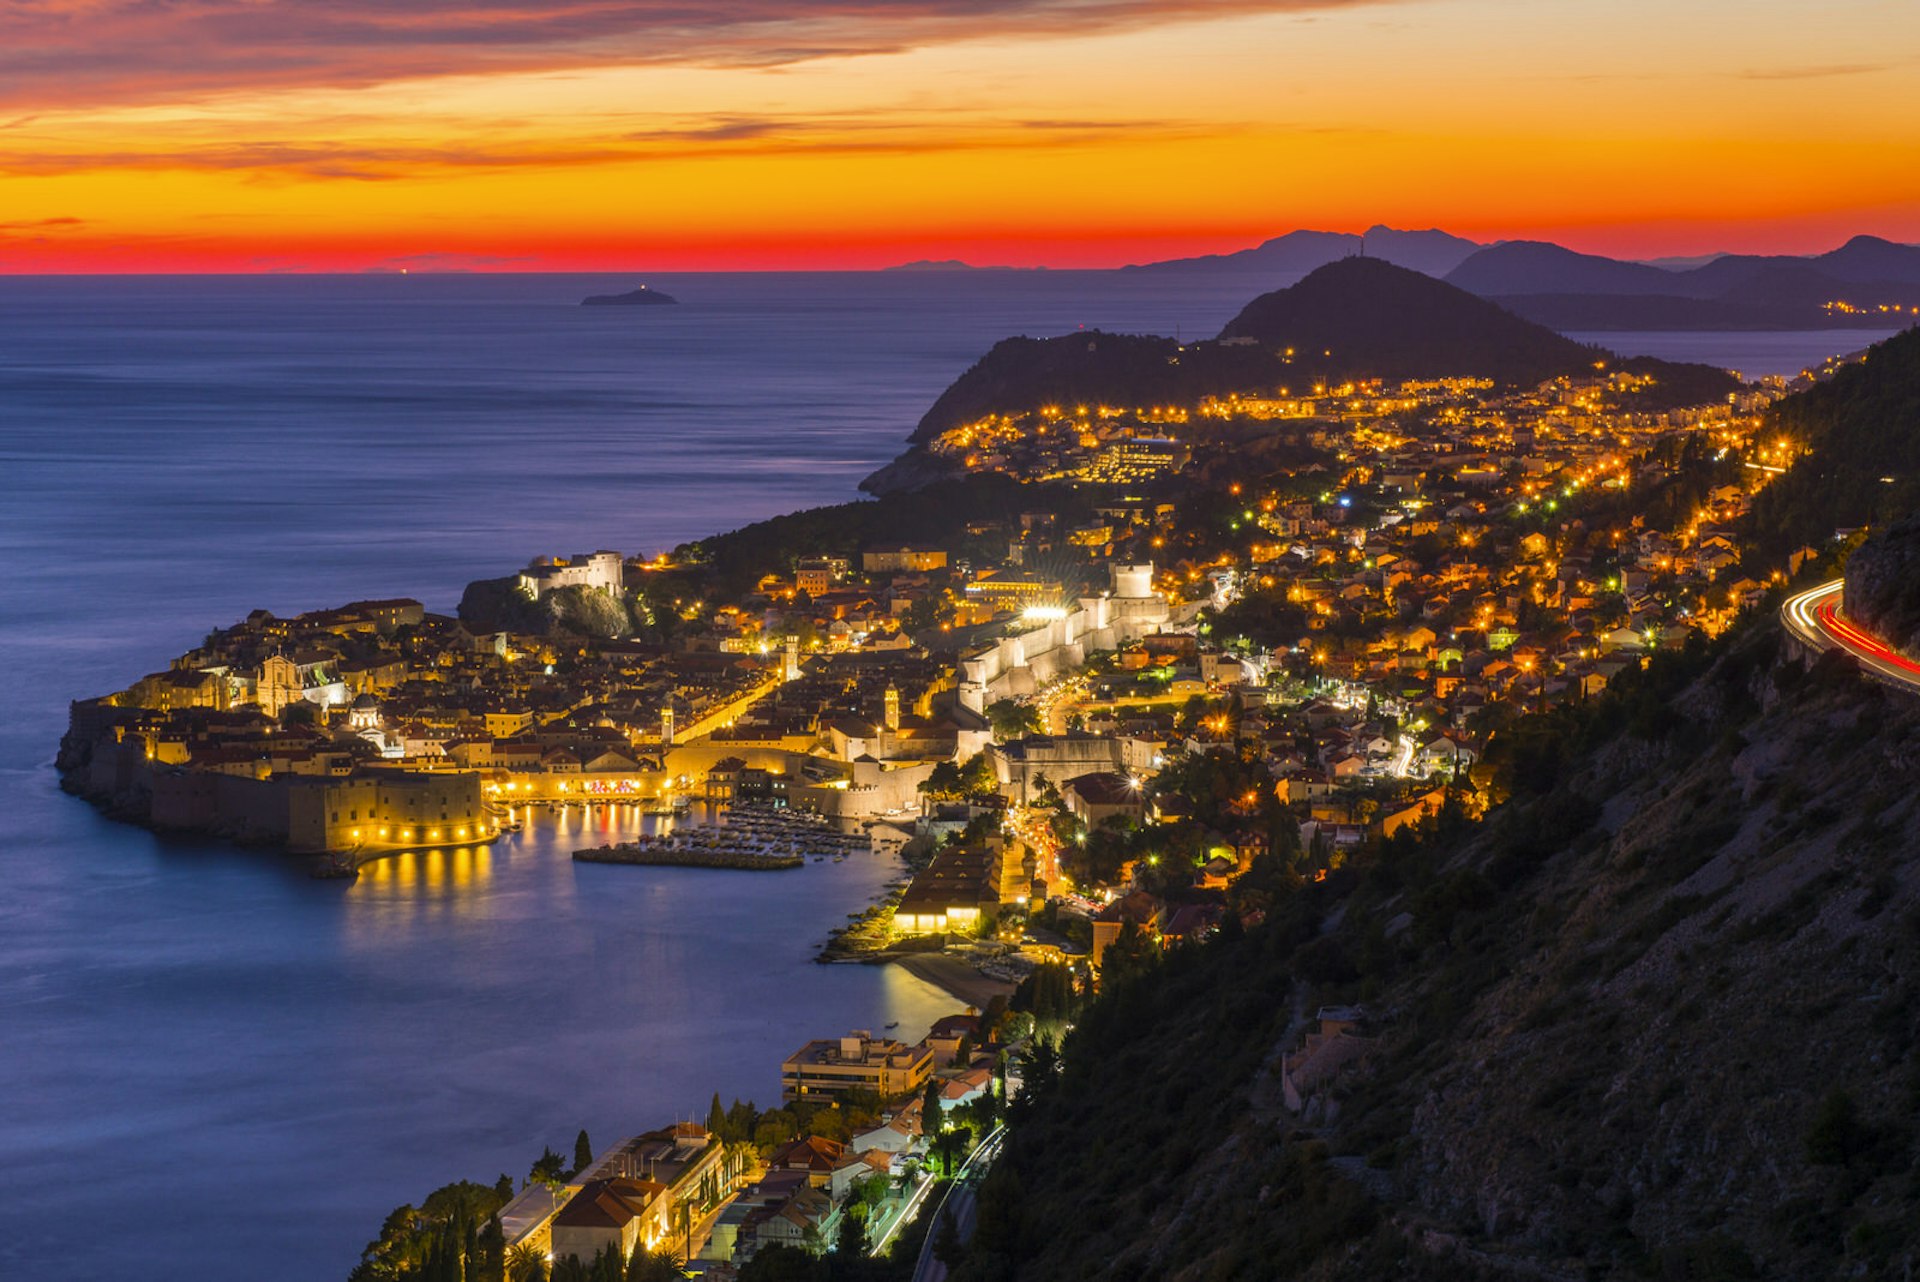 Dubrovnik is even more spectacular at sunset